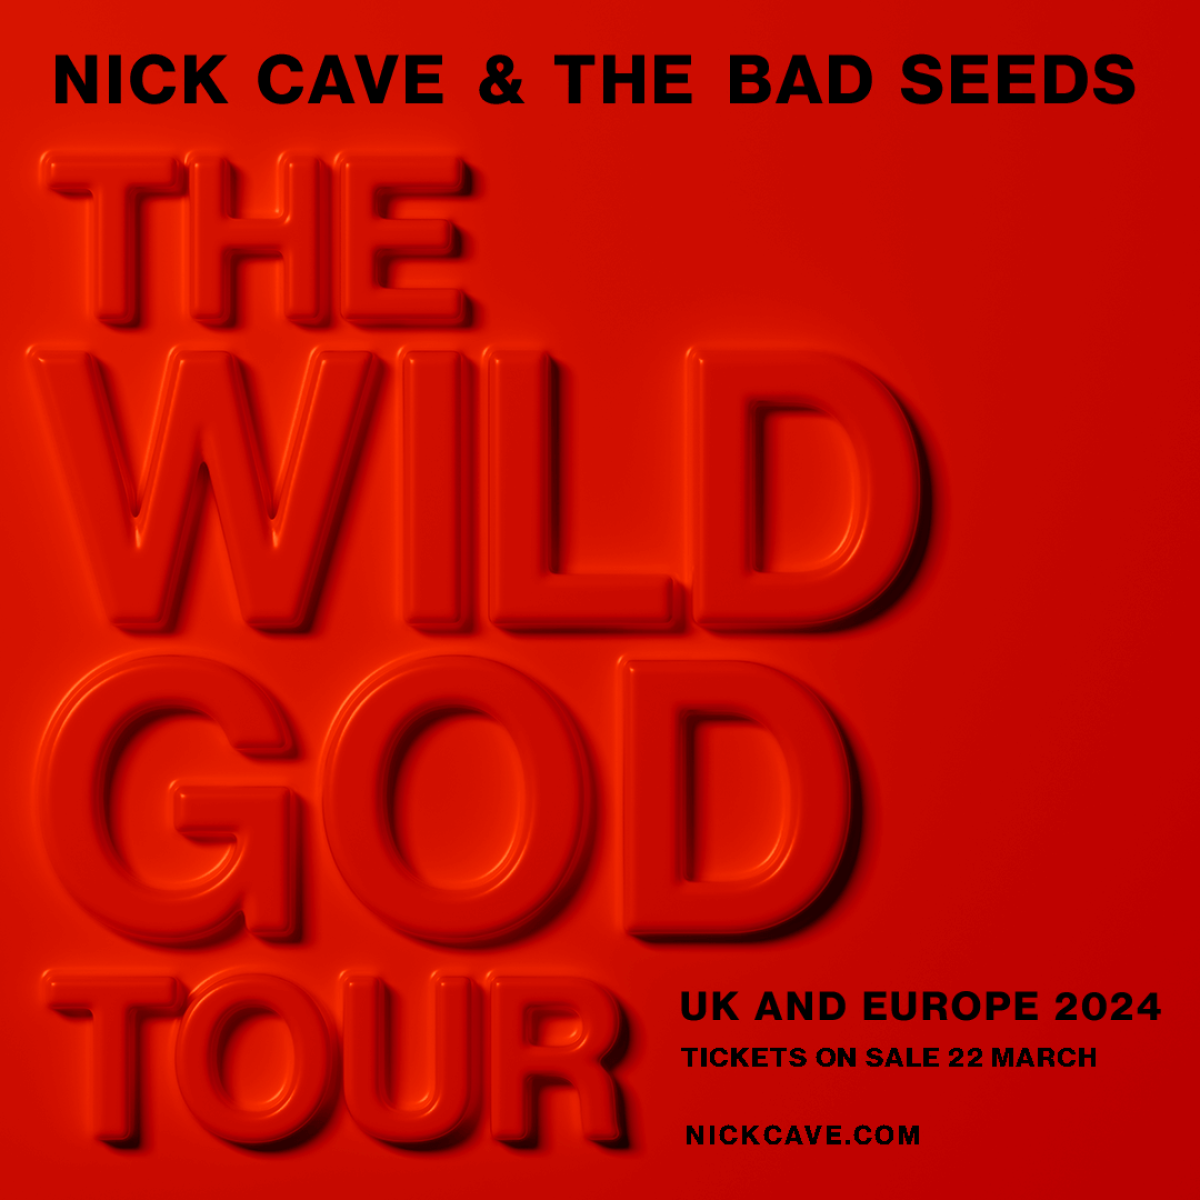 Nick Cave and the Bad Seeds - The Wild God Tour at Olympiahalle Munchen Tickets